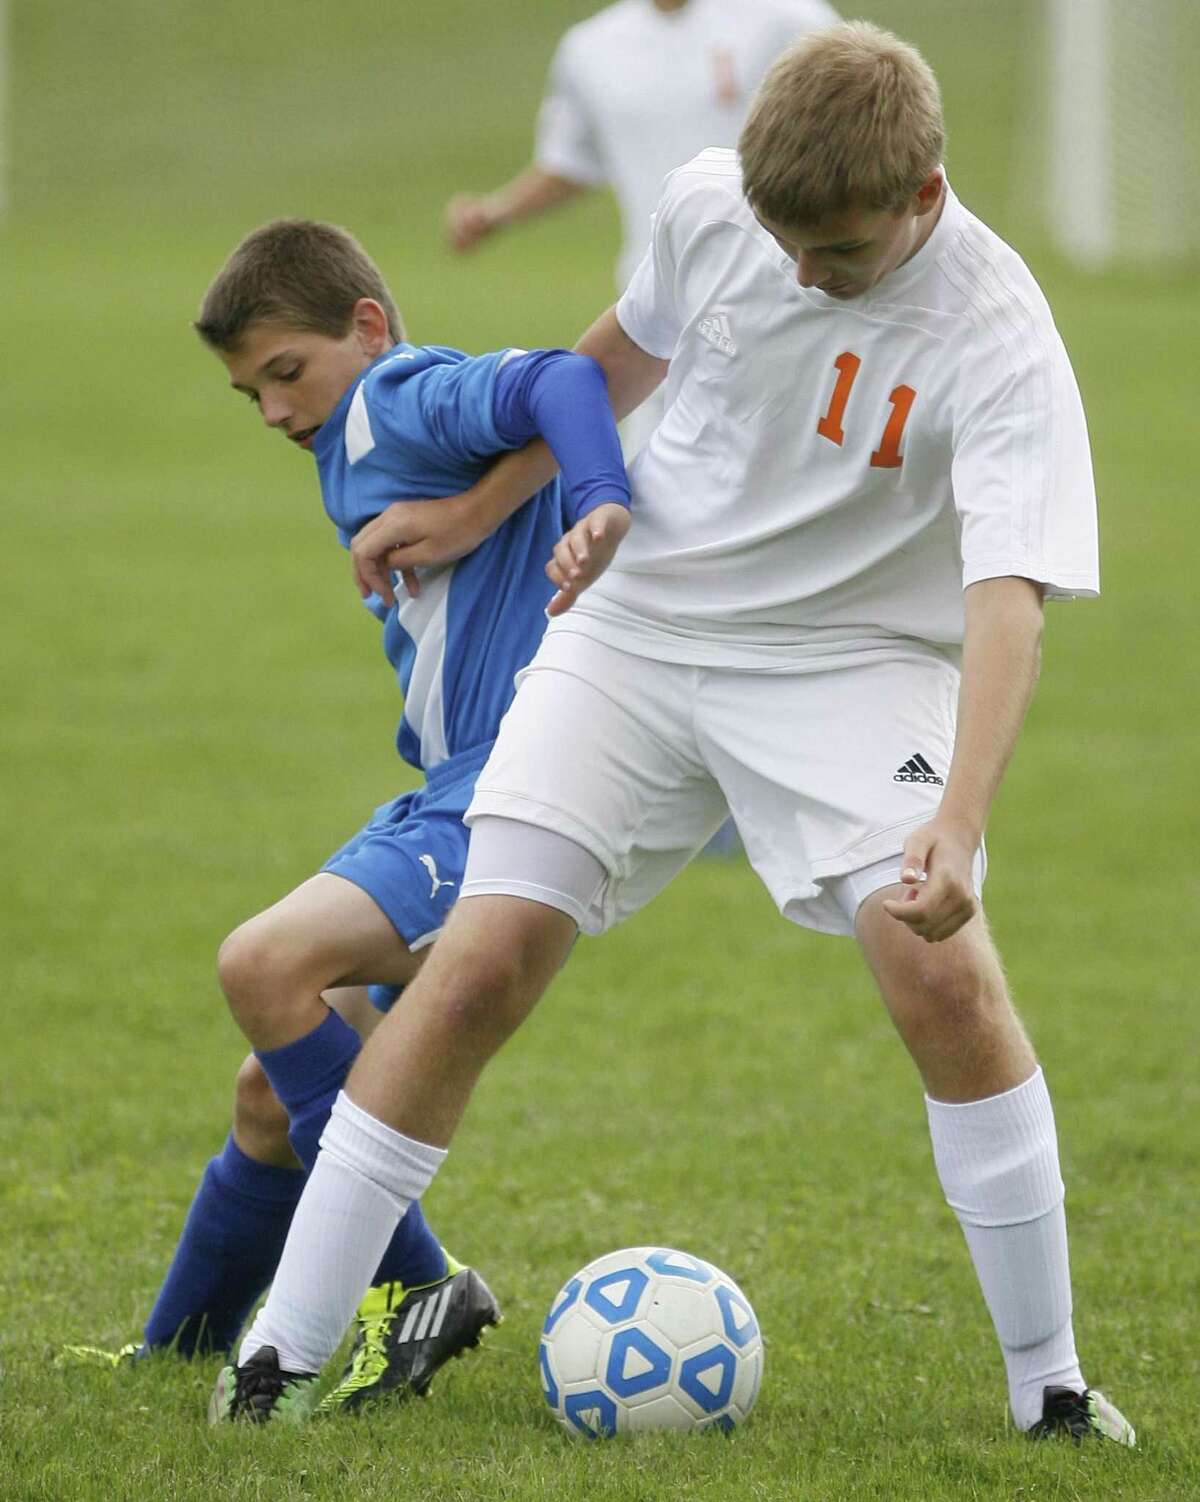 Dispatch Staff Photo by JOHN HAEGER twitter.com/oneidaphoto Camden Bailey Dixon (11) and Oneida Kyle Friend (11) hold each other off as they work for the ball in the first half of the match in Oneida on Thursday, Sept. 15, 2011.